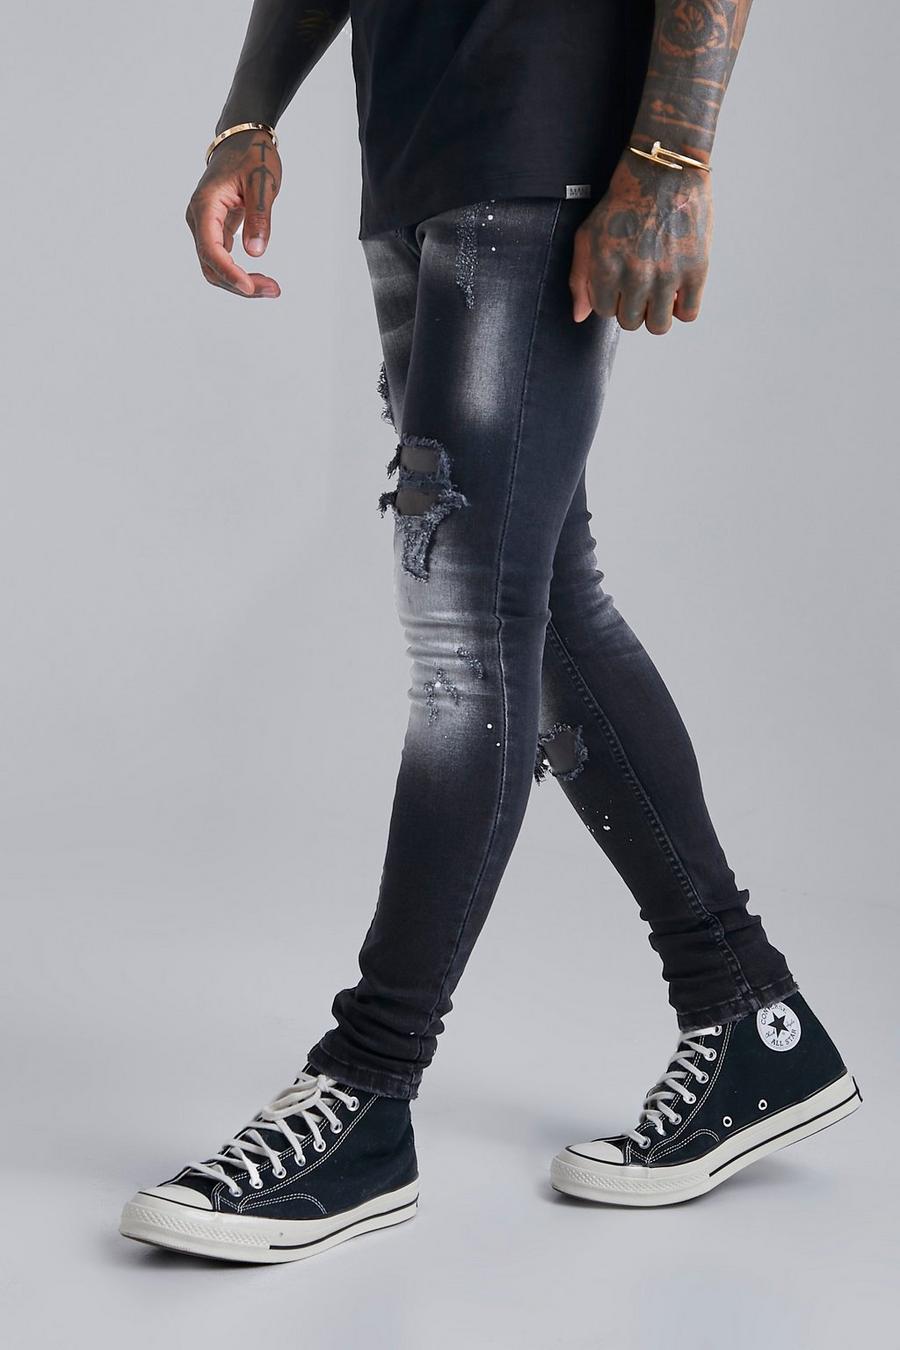 【HALO TOKYO】painted damaged skinny jeans